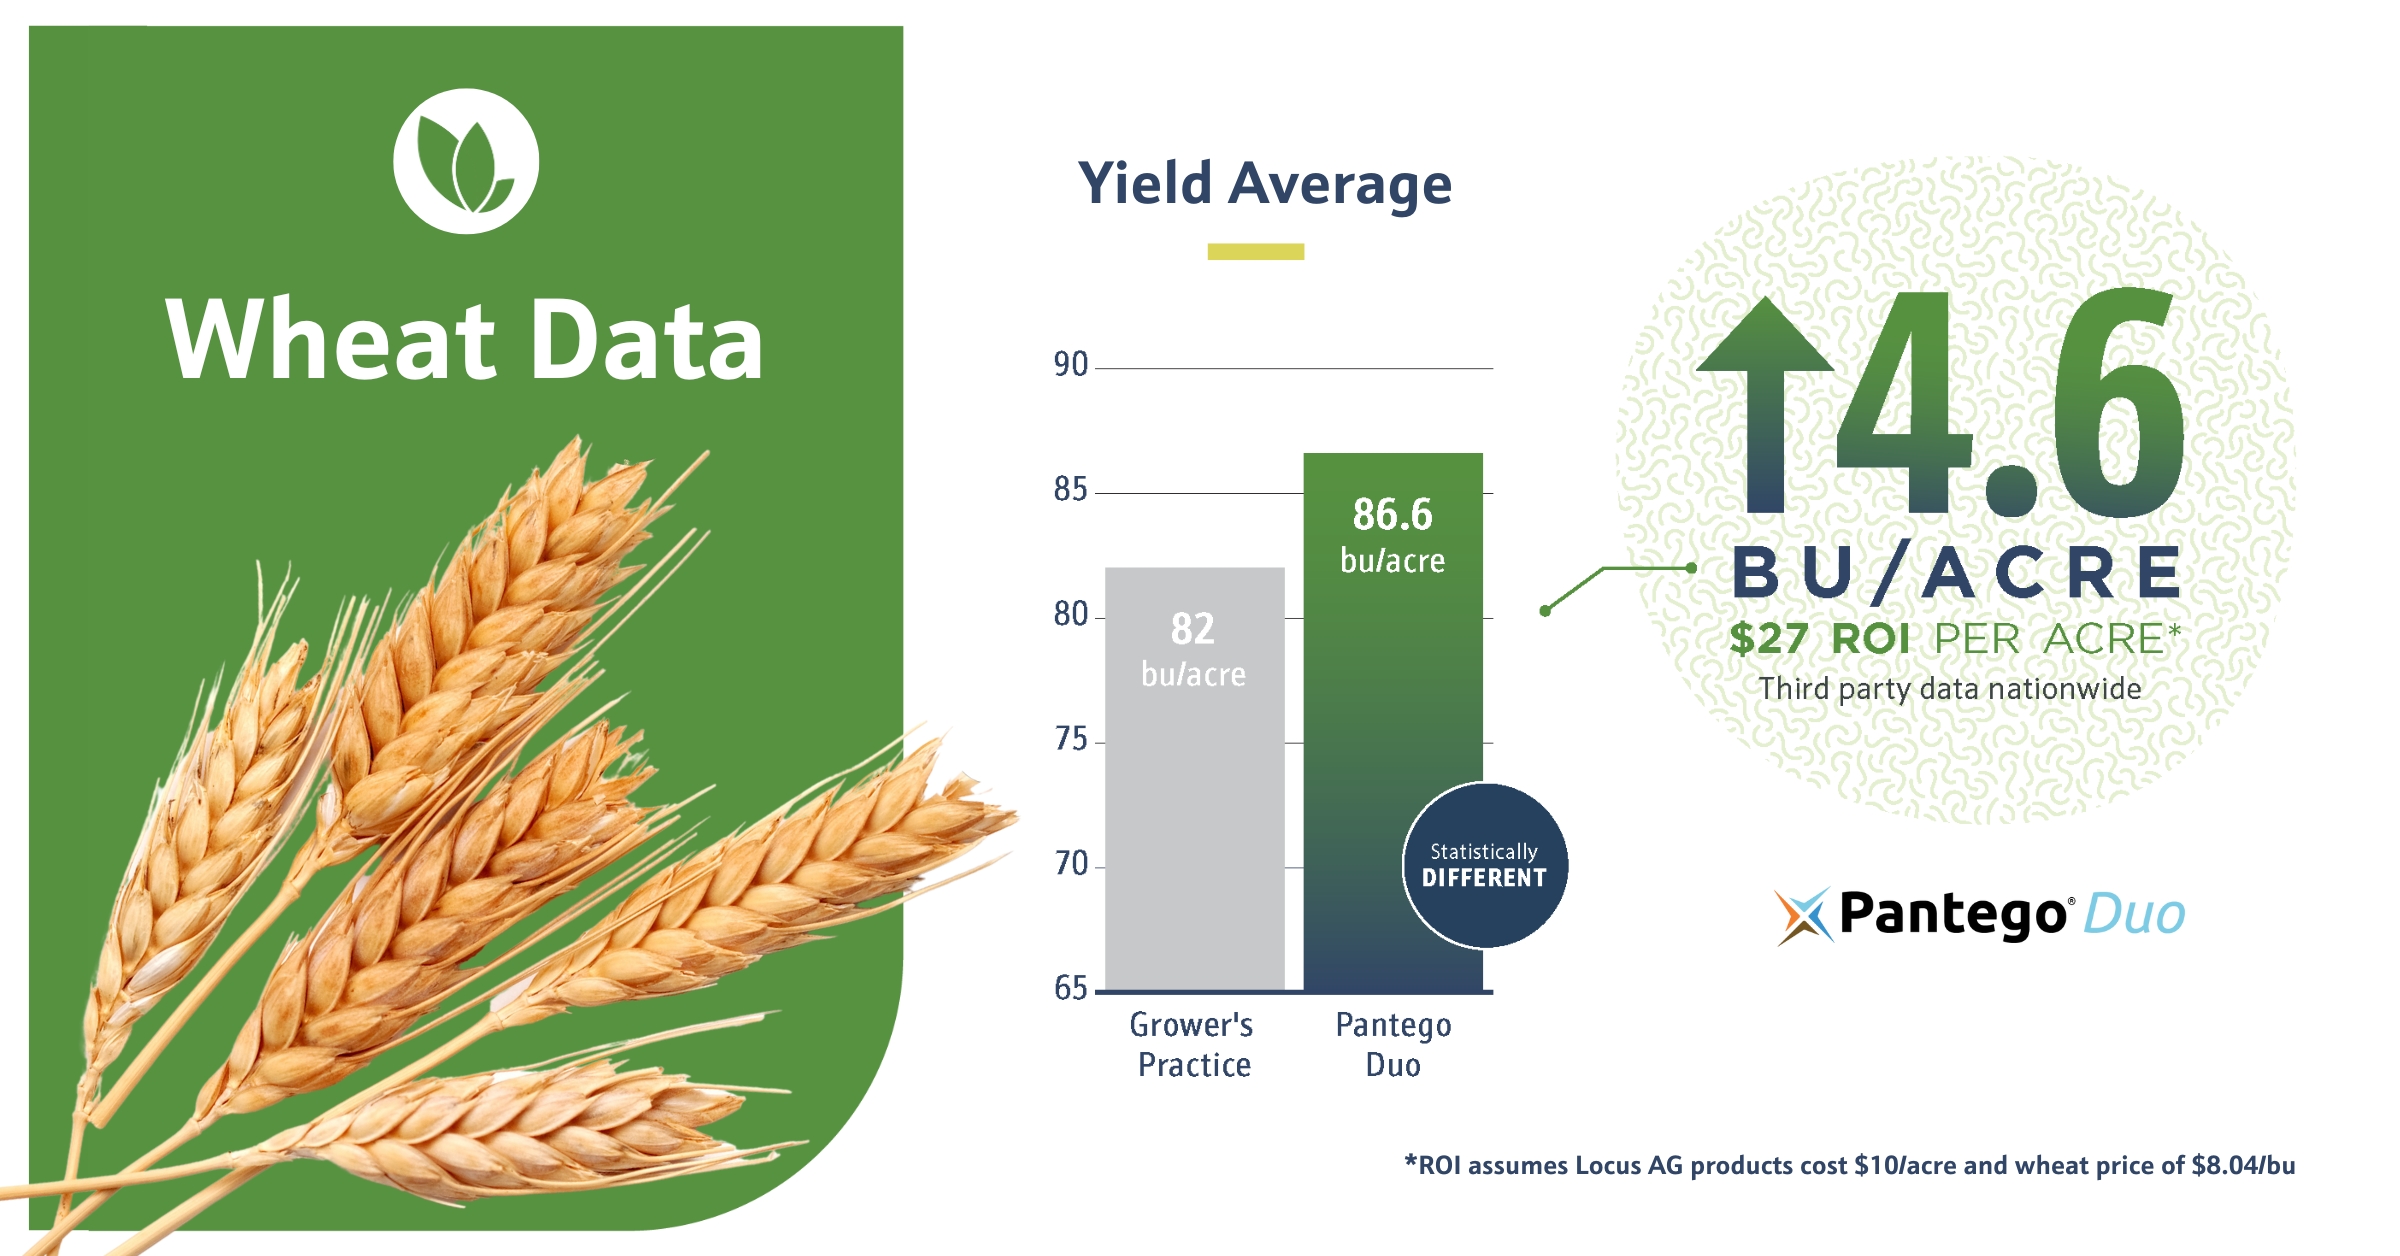 locus-ag-wheat-production-yield-increases